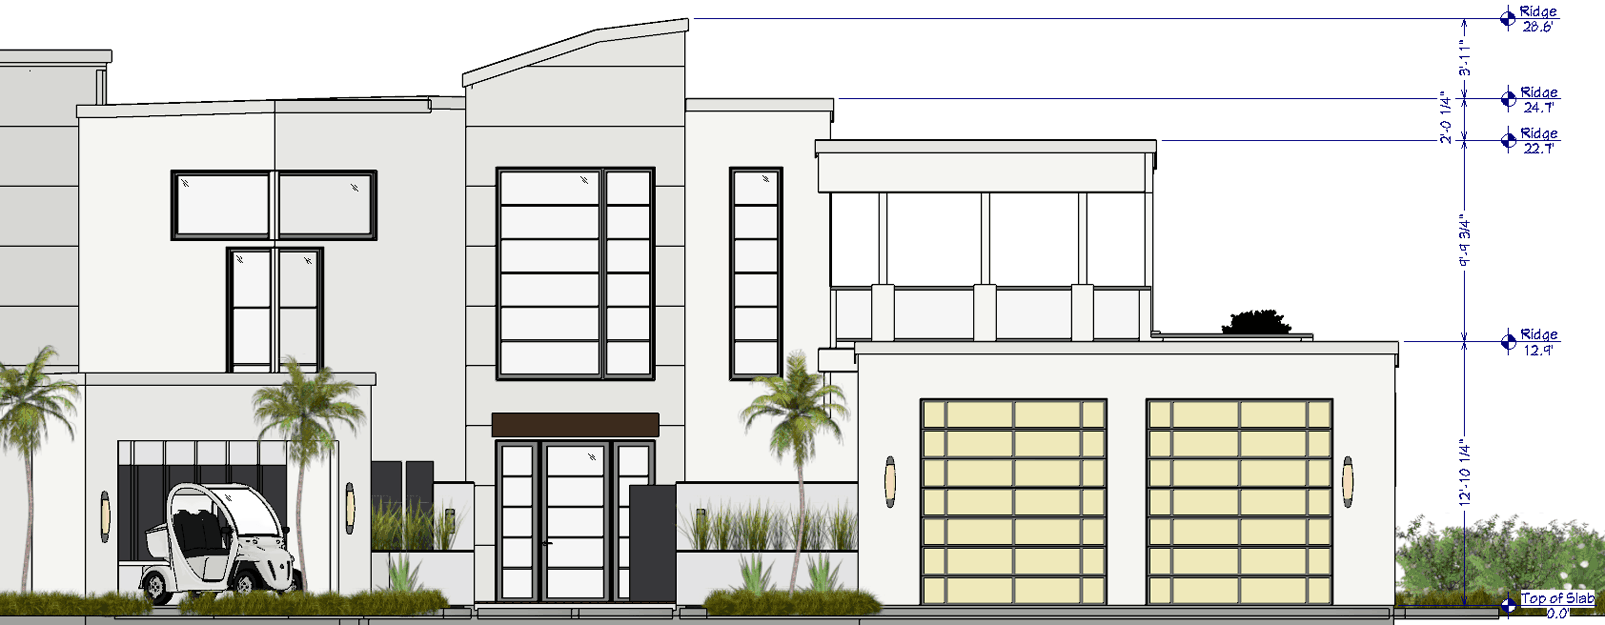 Exterior elevation with dimensions.